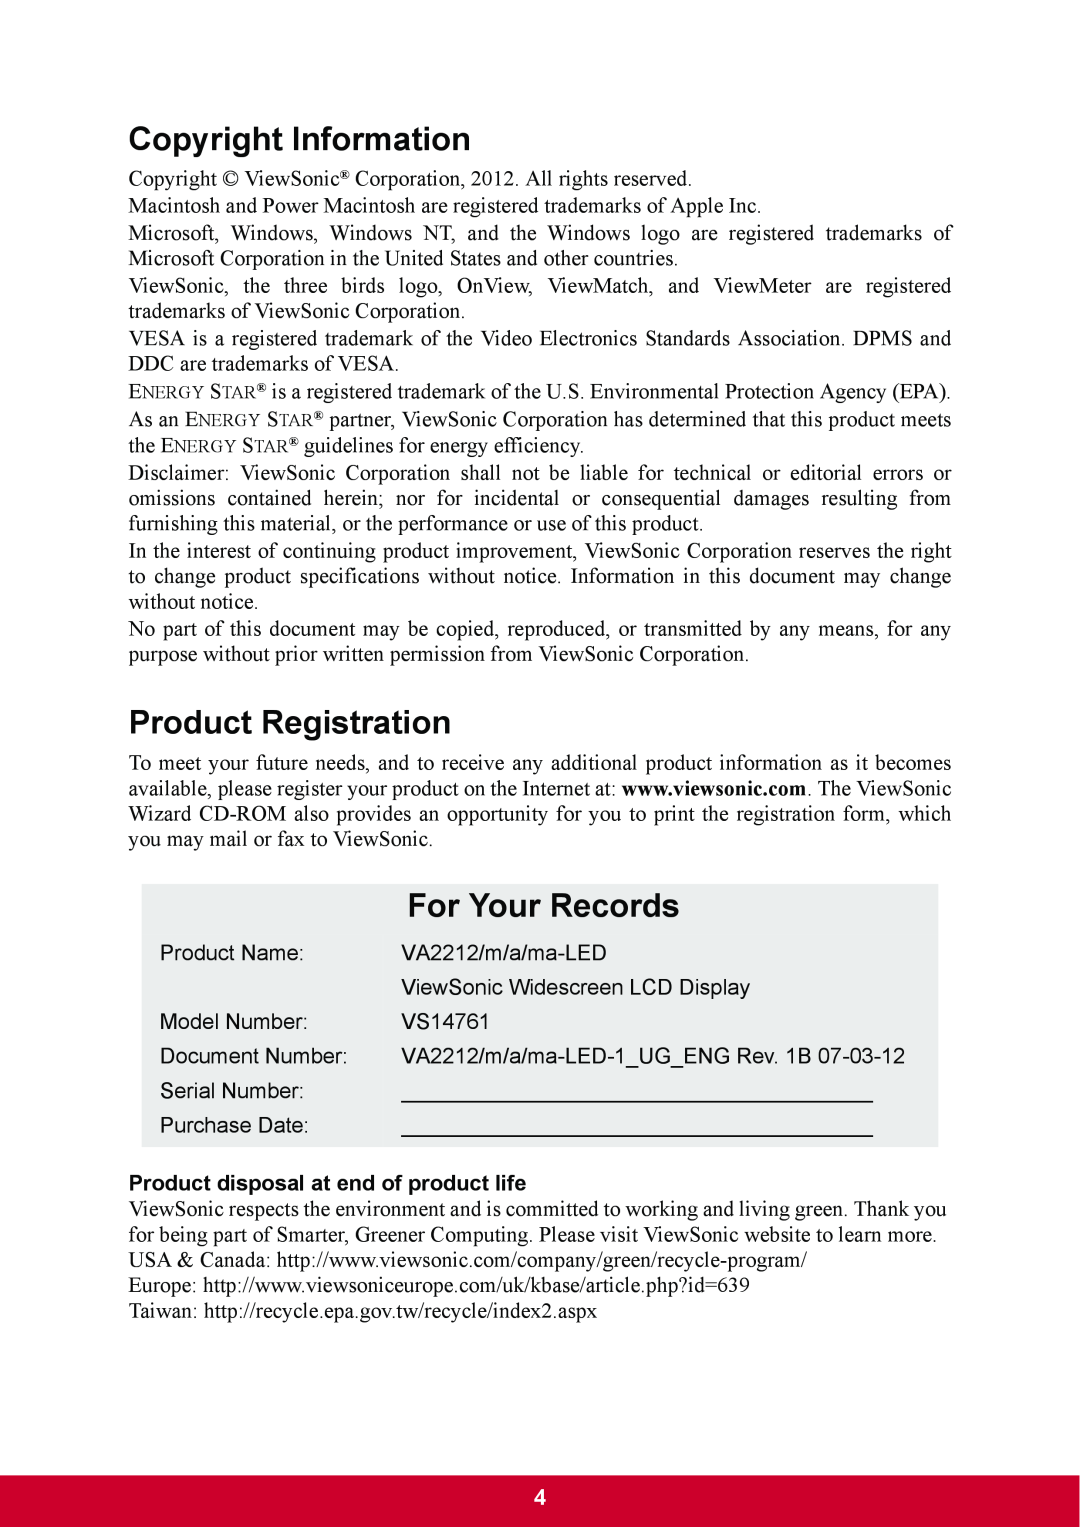 ViewSonic VA2212mLED, VA2212m-LED warranty Copyright Information, Product Registration, For Your Records 